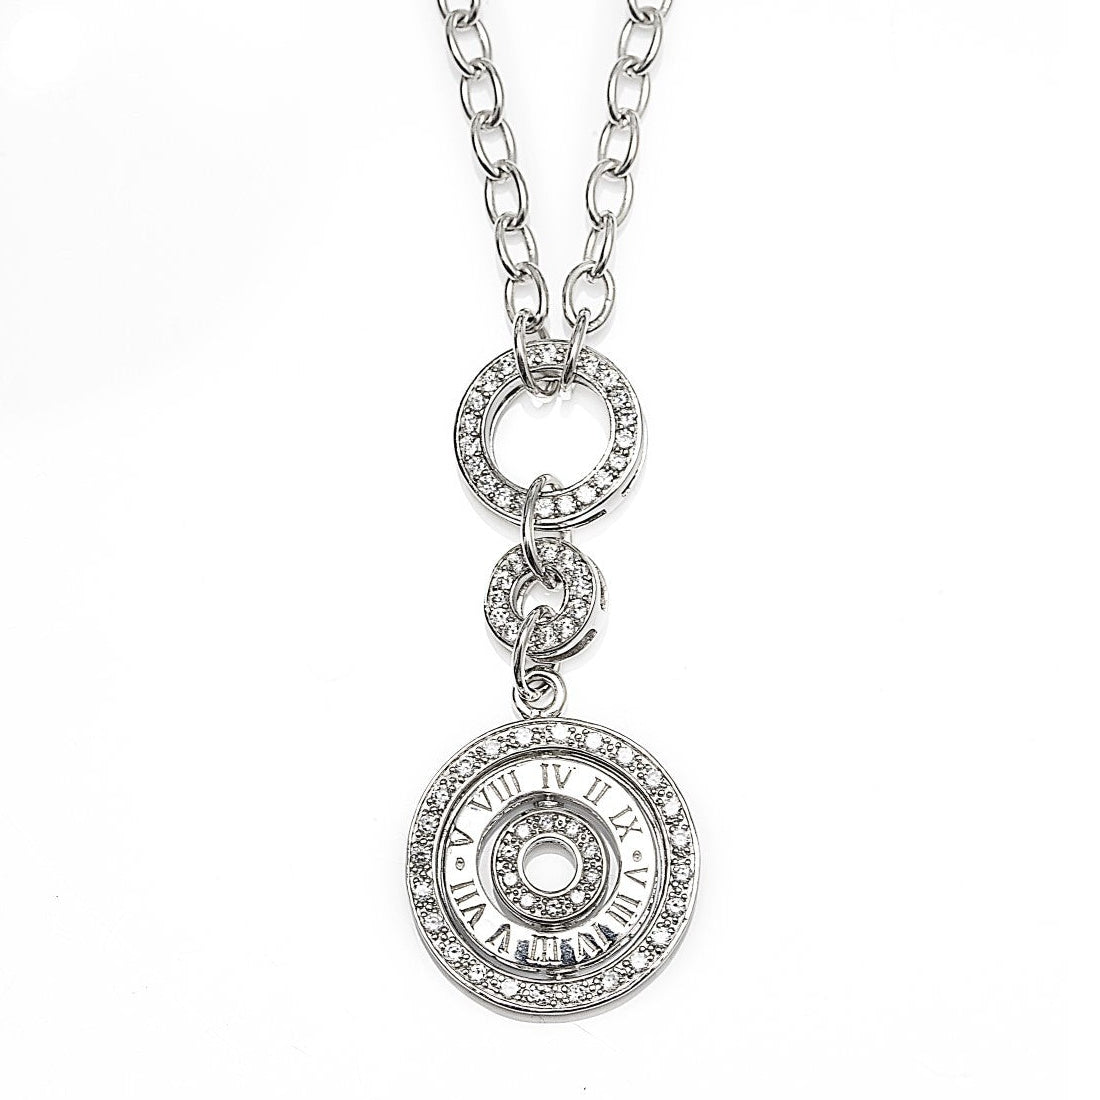 Amazing Short Juicy Necklace in 925 Sterling Silver with a Flip Pendant with Roman Numerals and cubic zirconia. Worldwide shipping from Australia. Affordable luxury jewellery by Bellagio & Co.